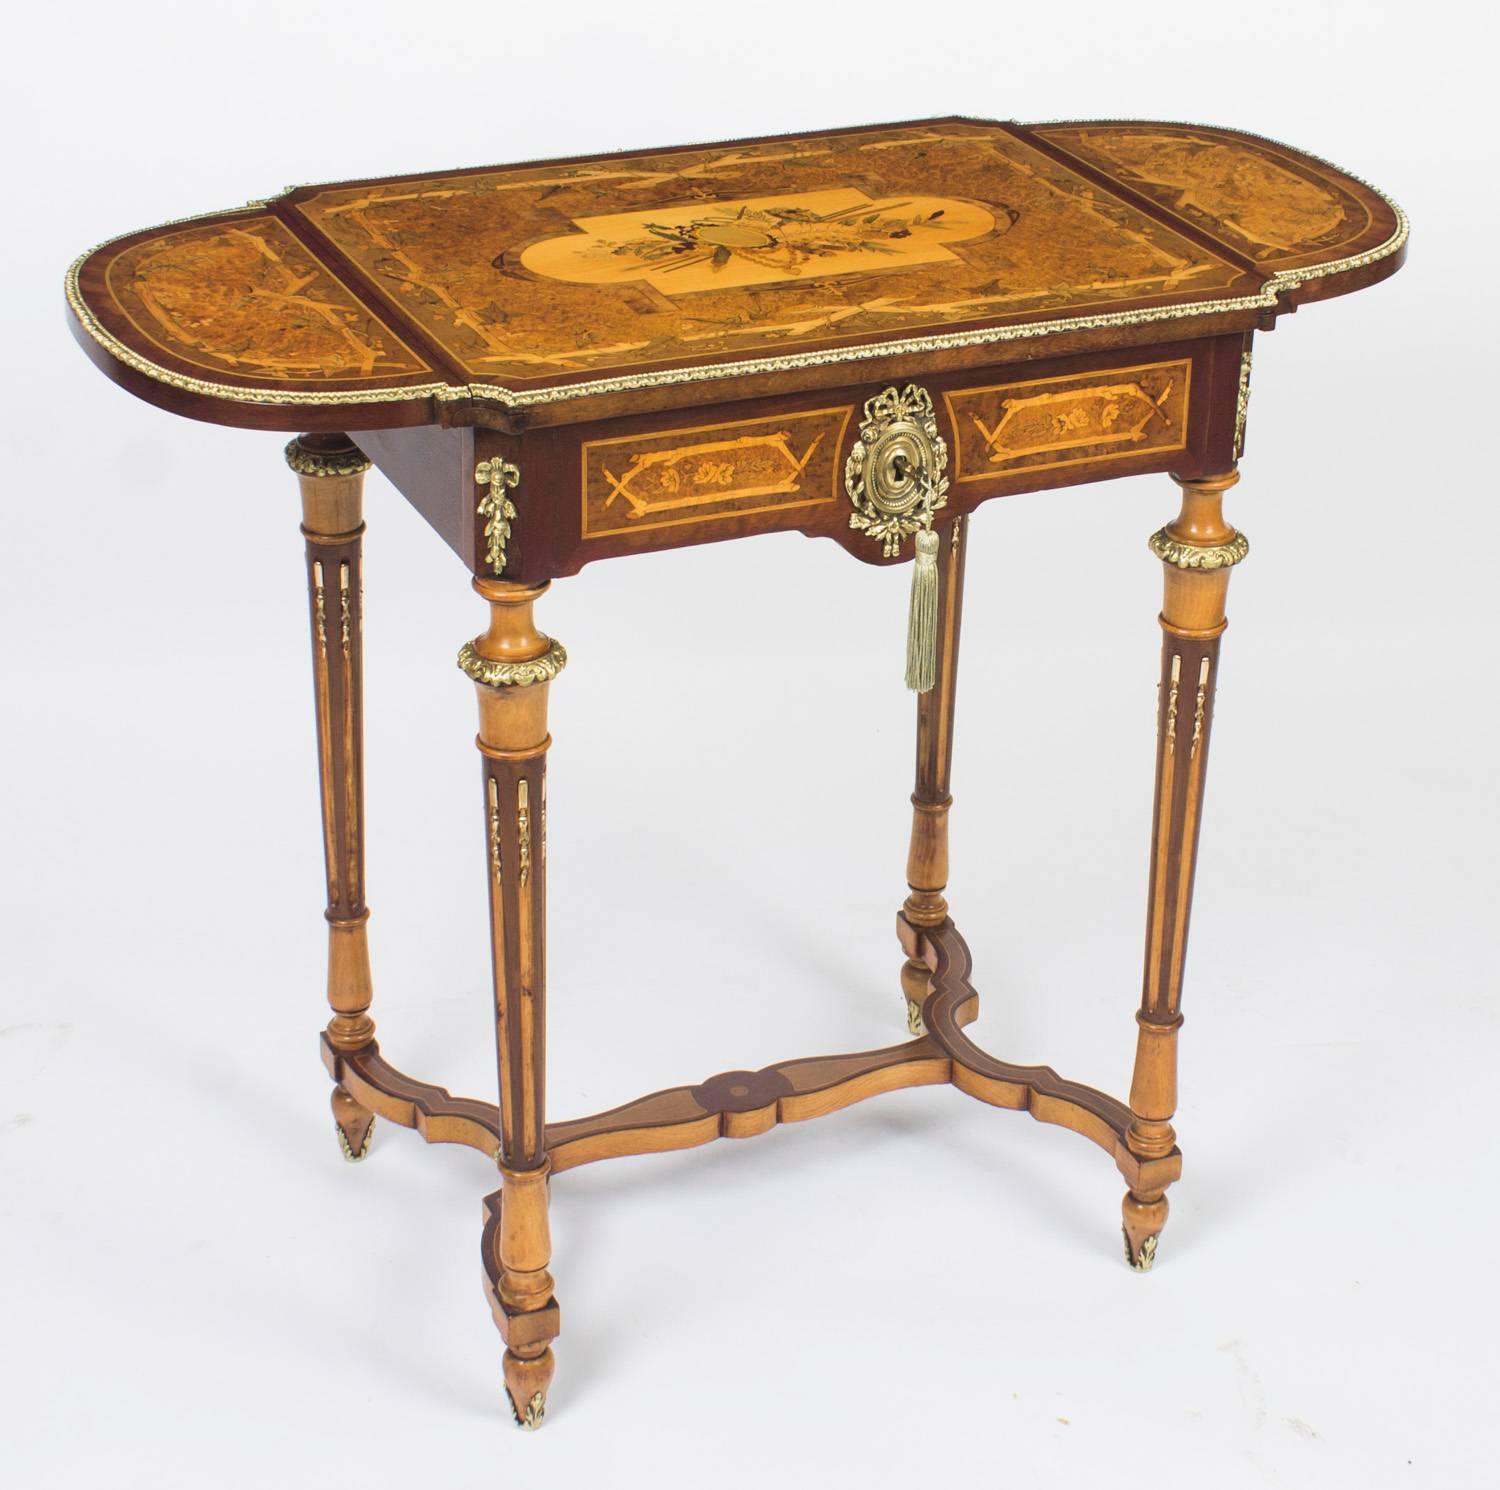 This is a wonderful antique French Napoleon III marquetry and ormolu mounted Poudreuse or writing table, circa 1860 in date.

The stunning marquetry lift up top is decorated with musical instruments, flowers and garlands and has a flap on each side